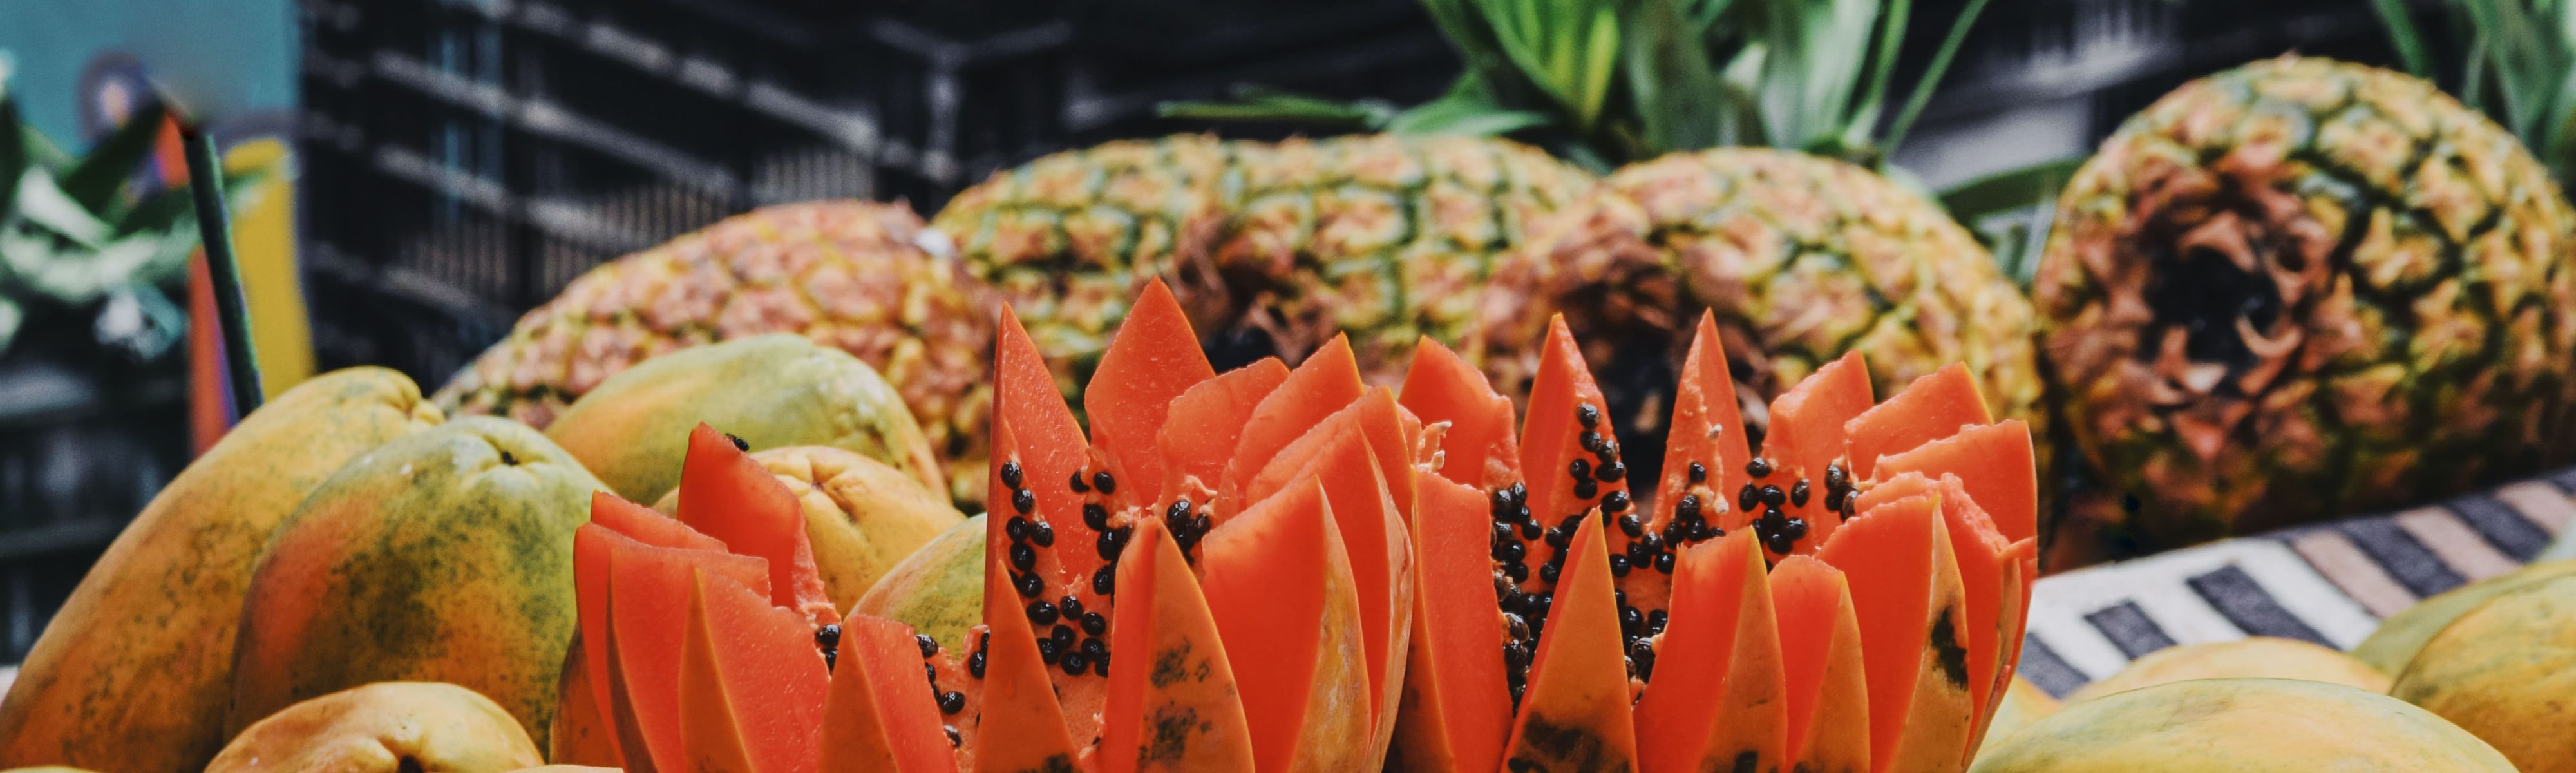 papaya cut up on table surrounded by costa rican pineapples